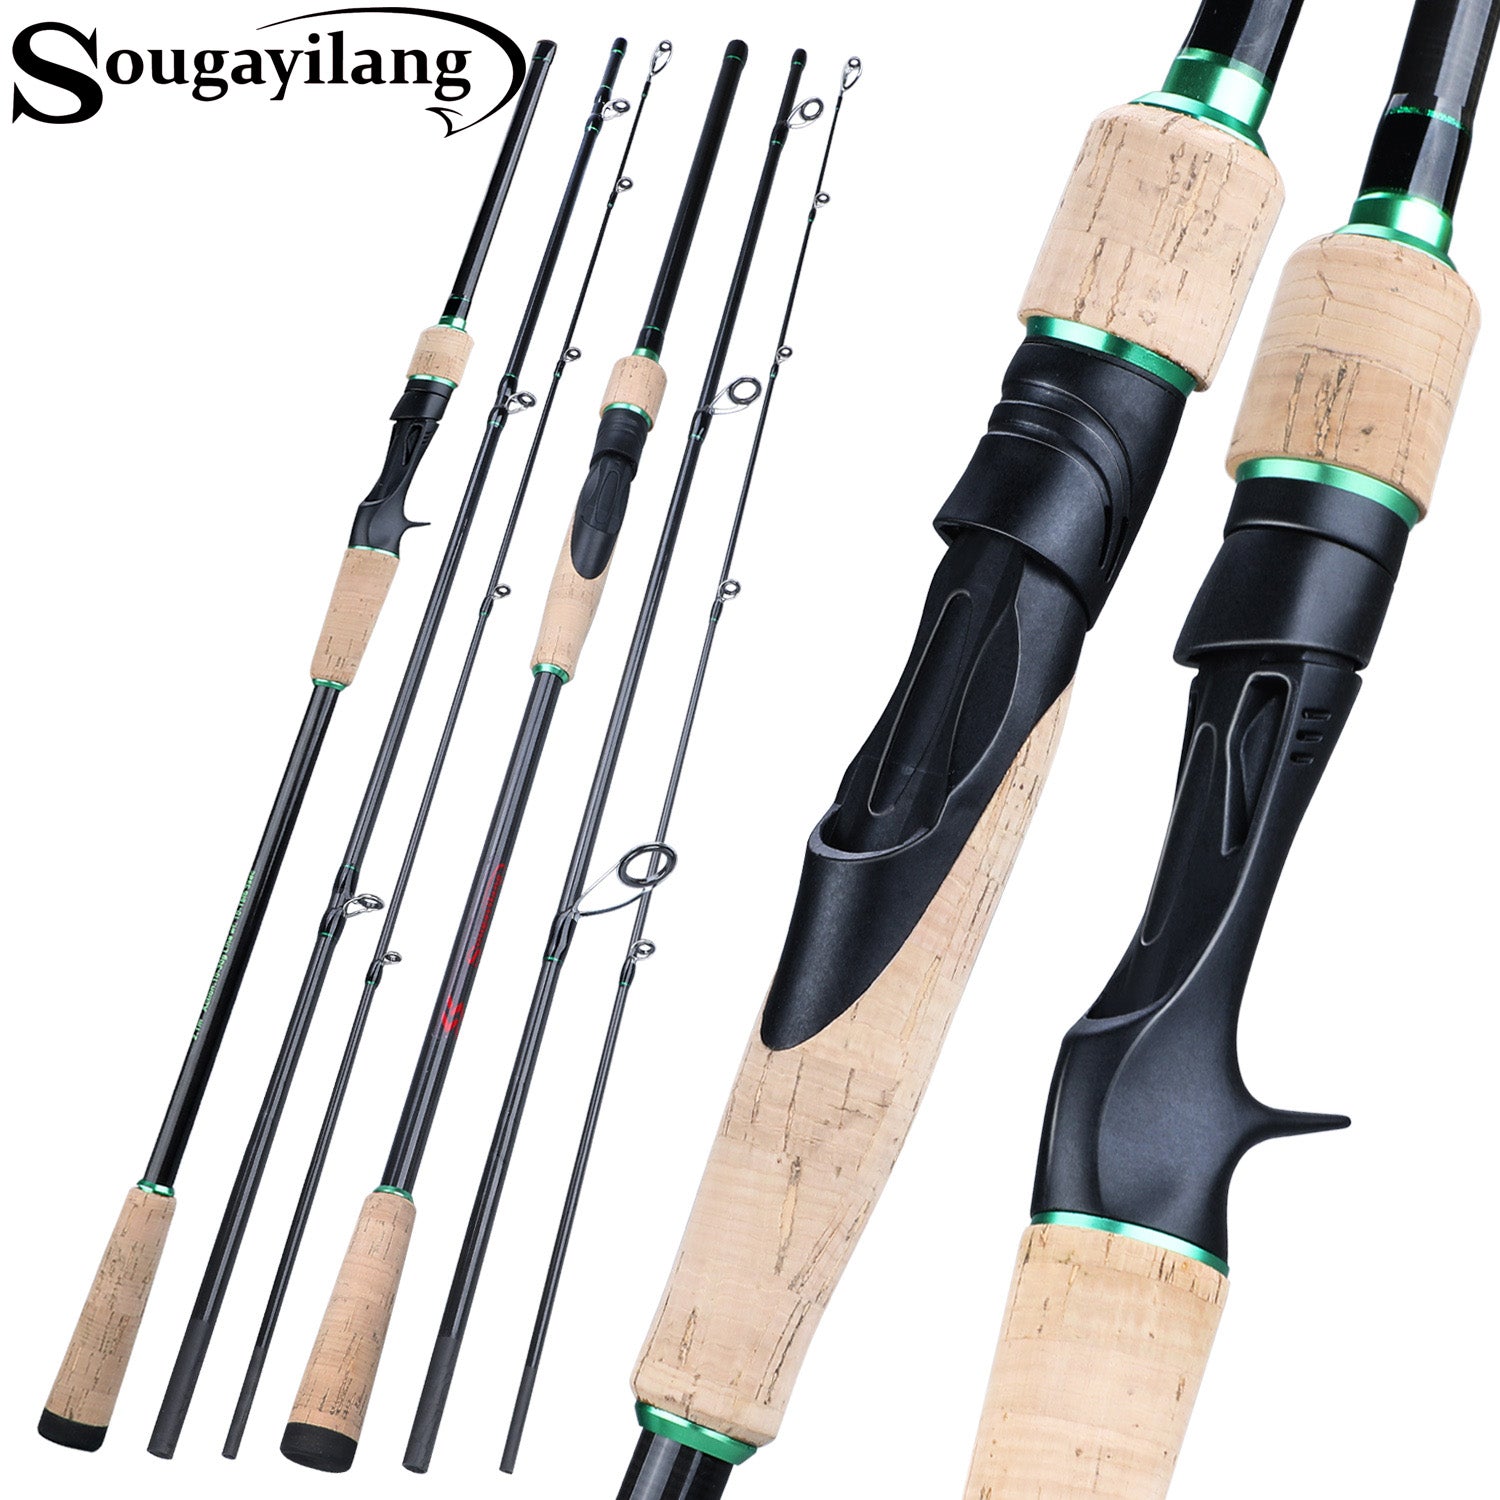 1.8m-2.1m Fishing Rod, Spinning/casting, Portable Travel 4 Sections  Ultralight Carbon Fiber Eva Handle Fishing Tackle